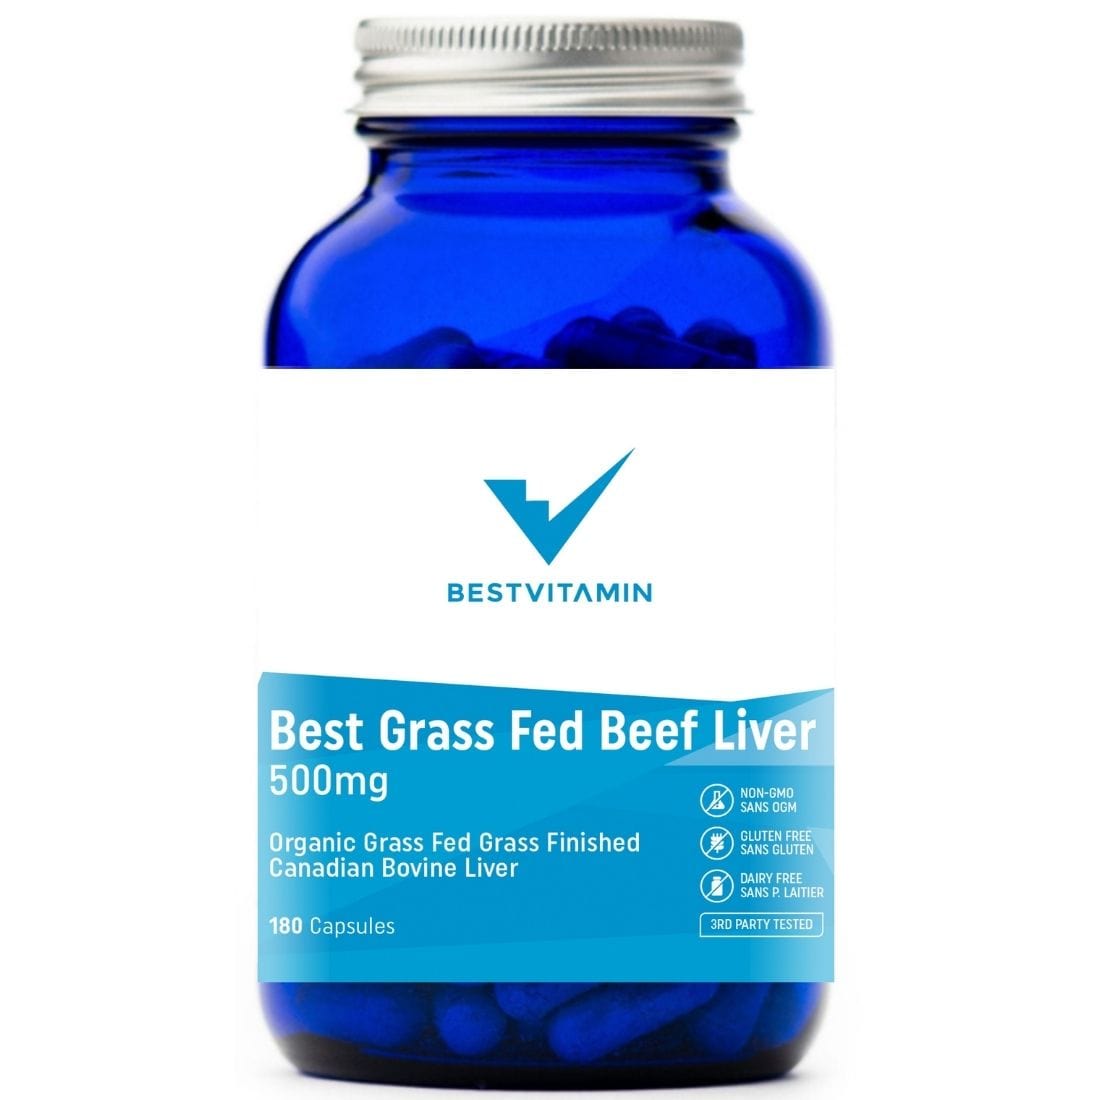 Buy Vital Proteins Beef Liver Supplement for Natural Energy